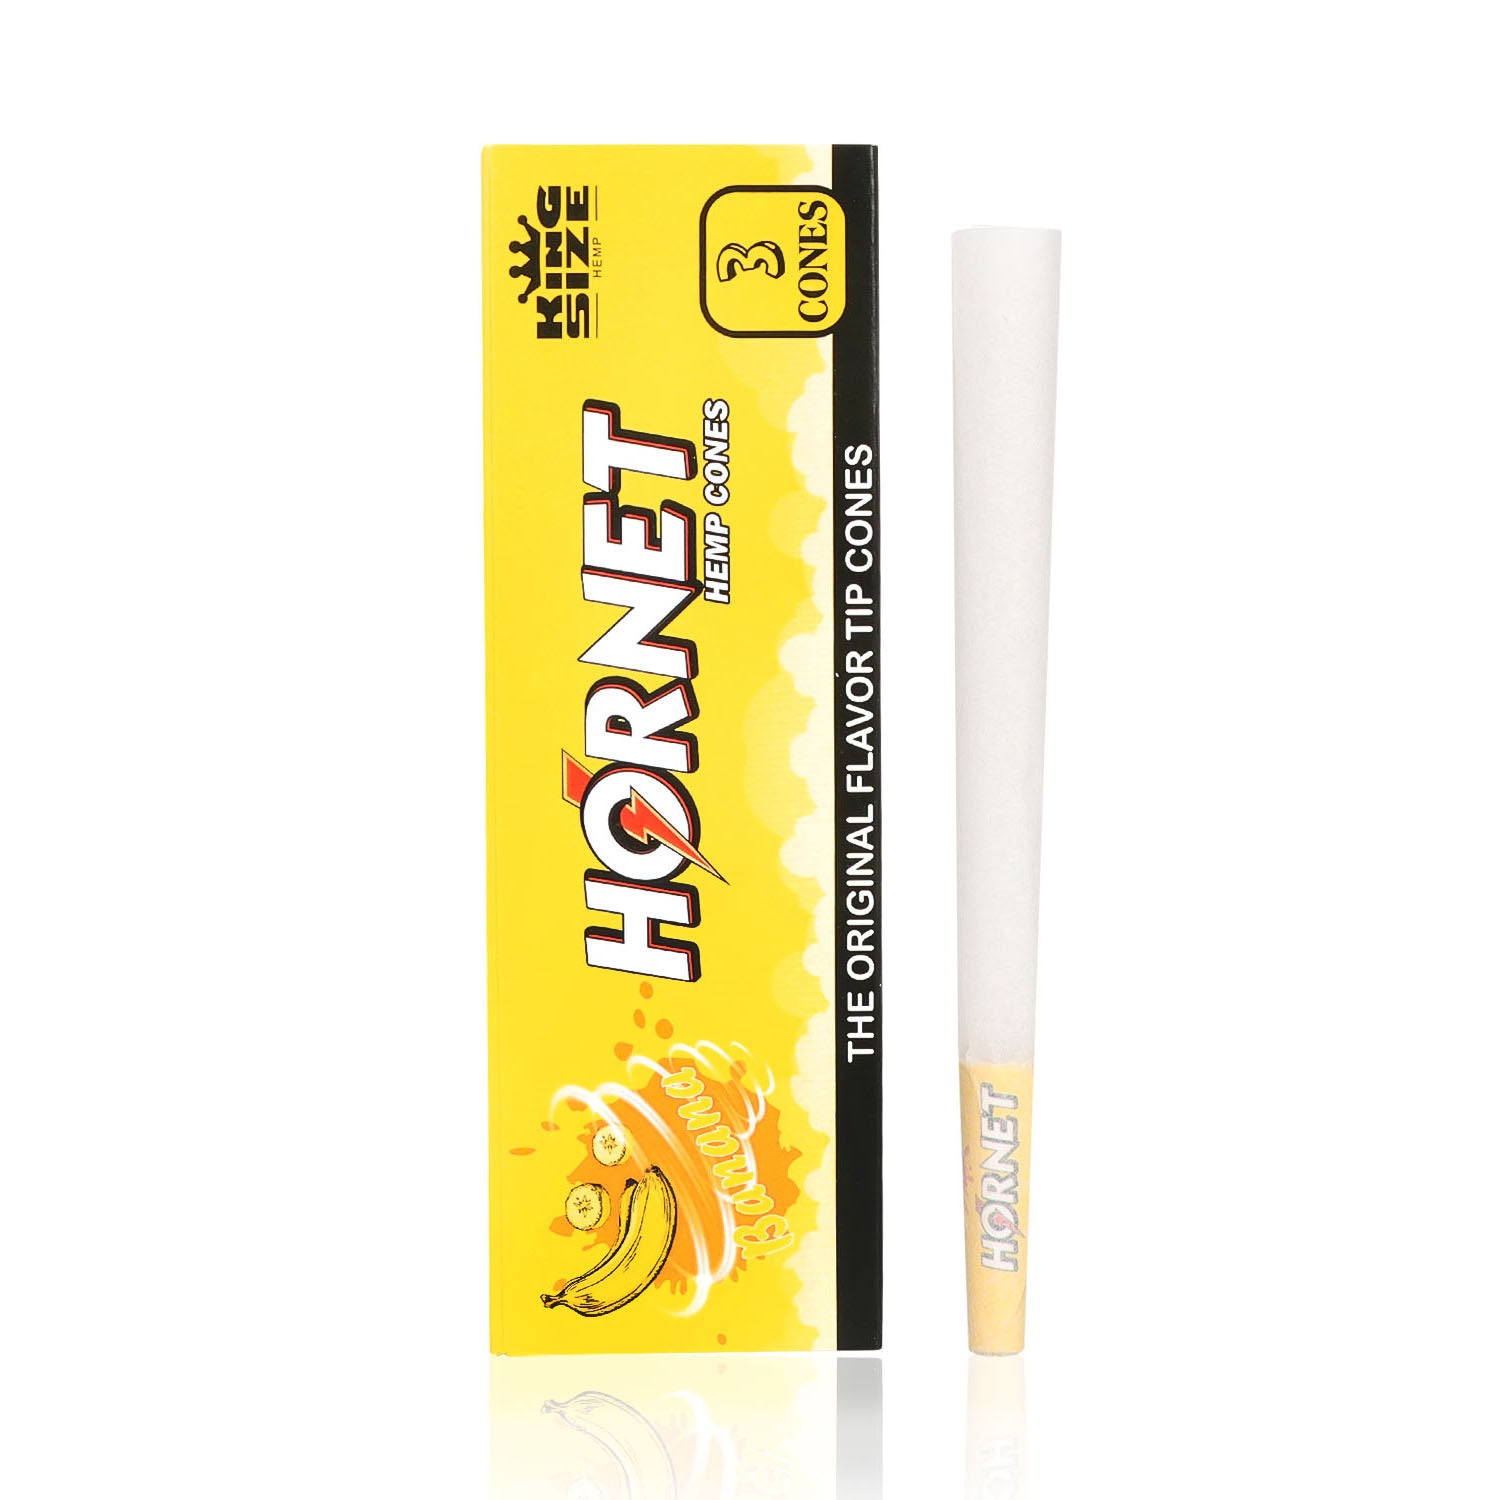 HORNET Banana Flavors Pre Rolled Cones With Tips, King Size Pre Rolled Rolling Paper & Flavored Pop, 3 PCS / Pack 12 Pack / Box